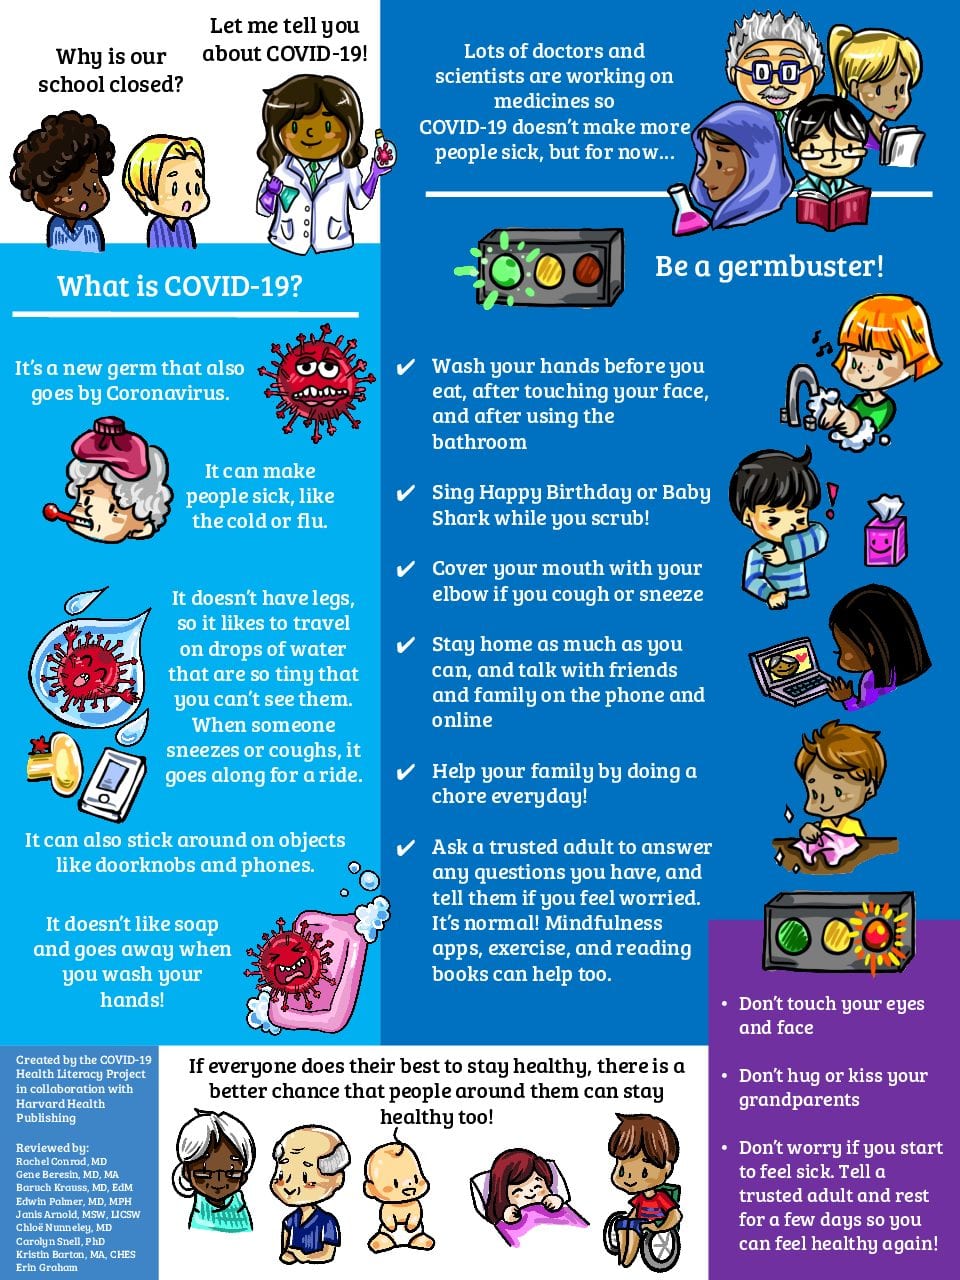 Inform Our Children: COVID-19 Infographic for Kids (Ages 6-12)